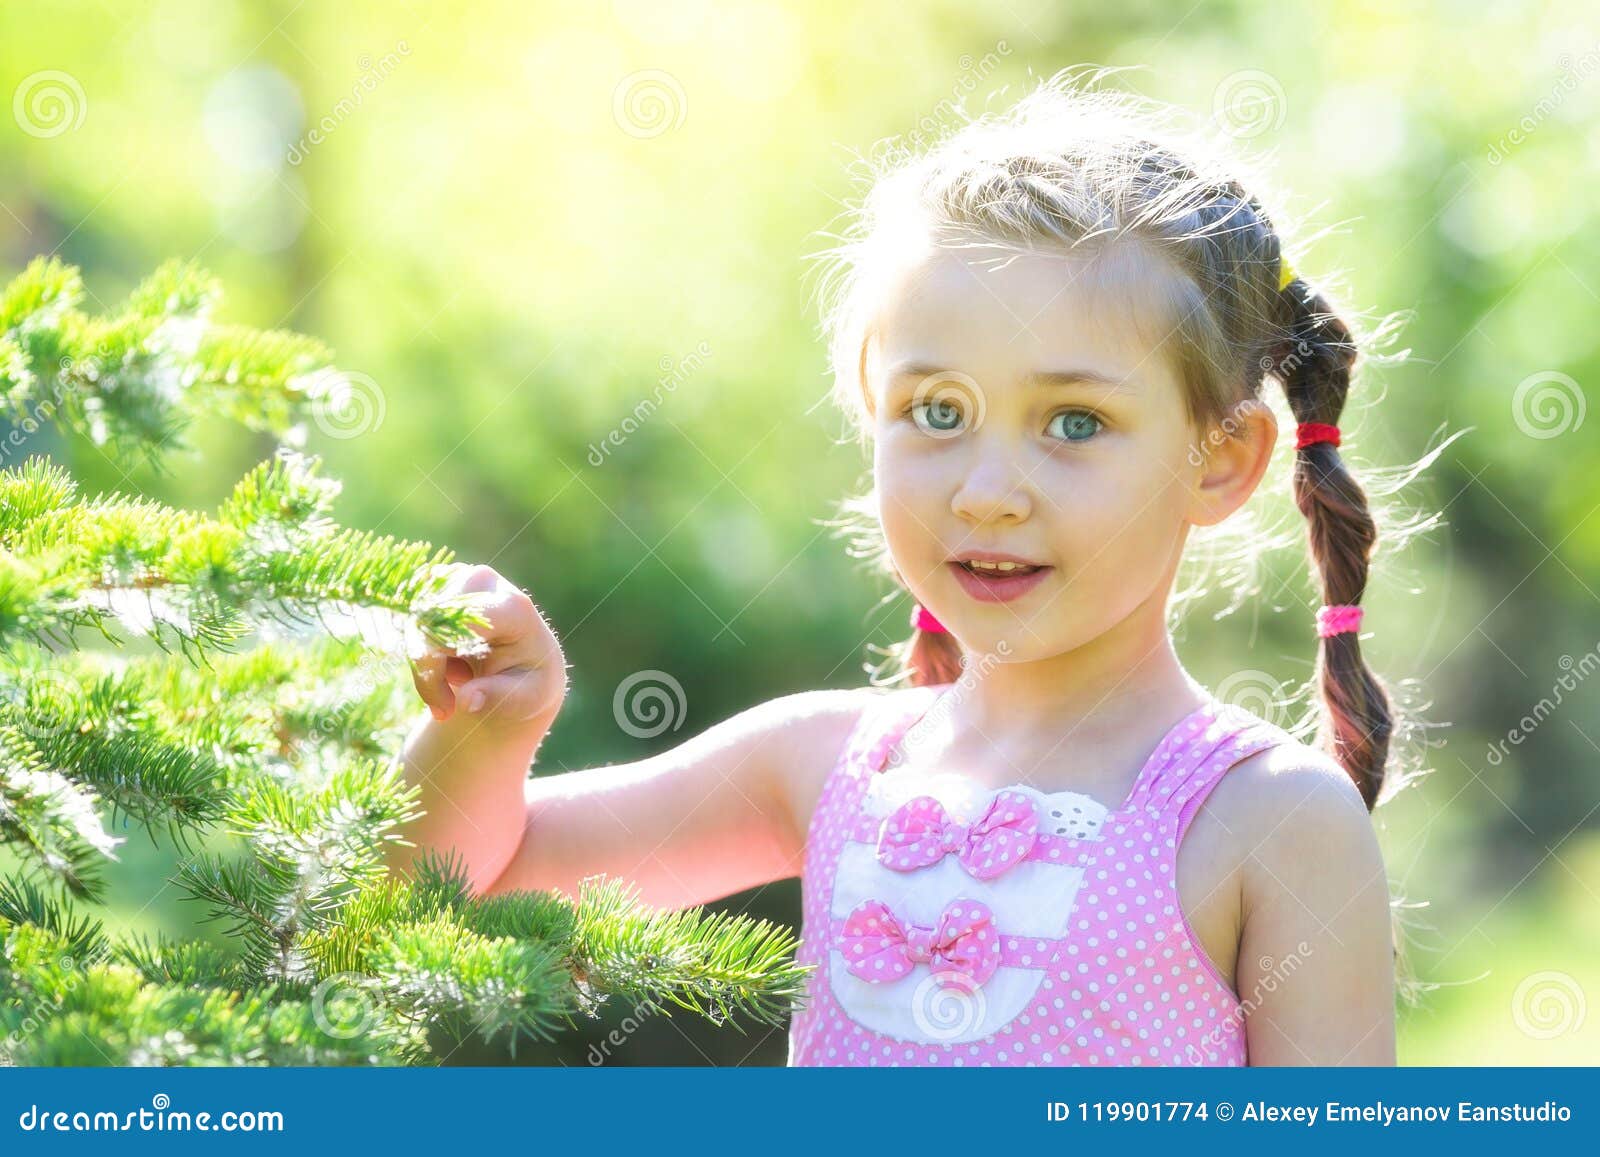 A 5 Year Old Girl in a Pink Dress in the Forest. Stock Photo - Image of ...